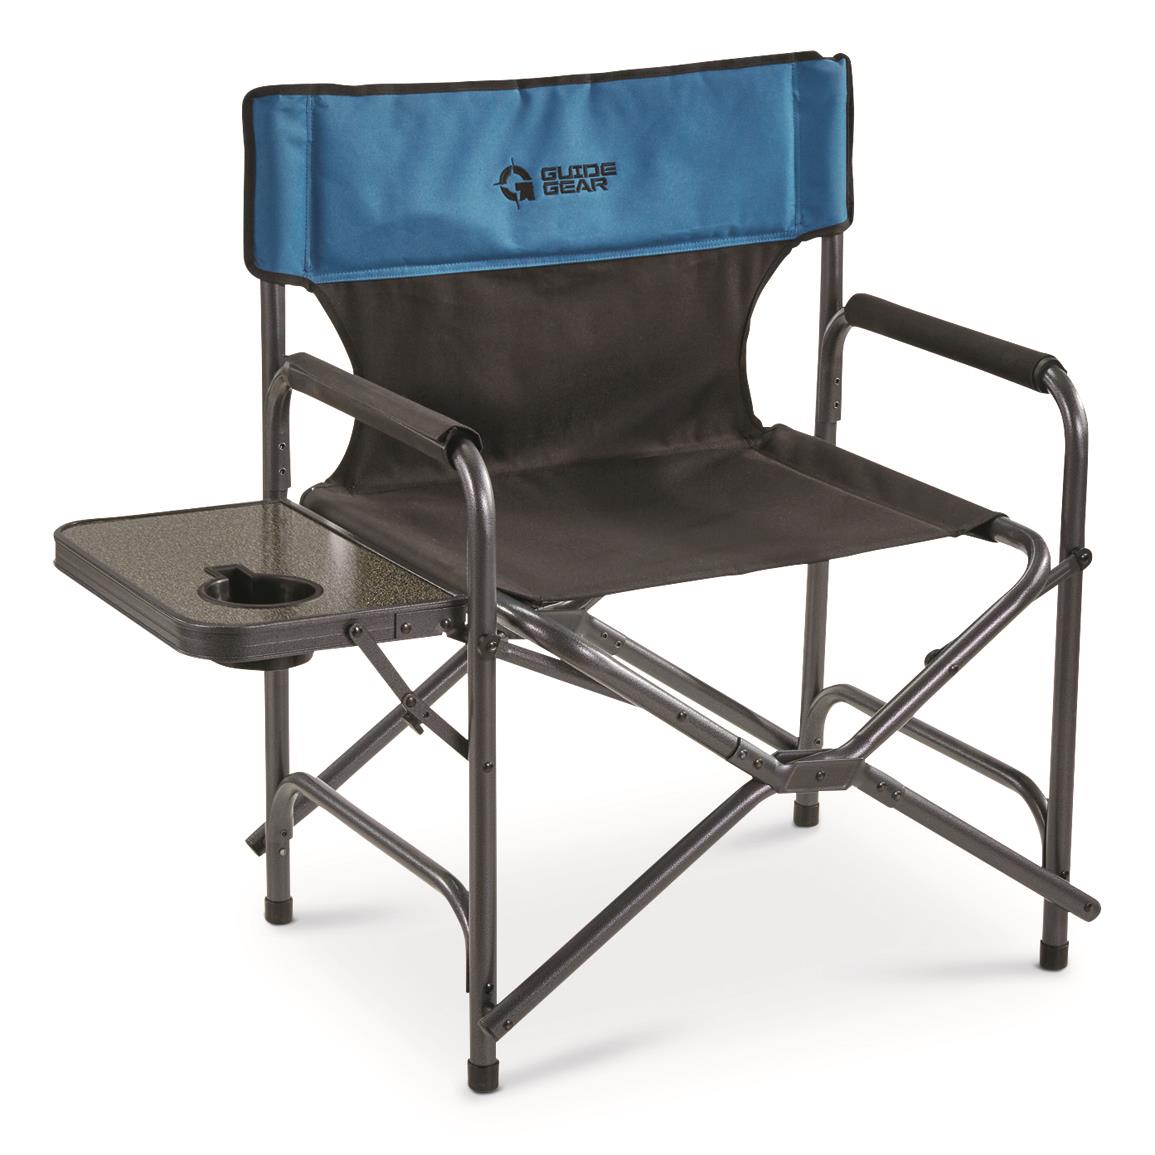 Steel frame holds up to 500 lbs., Blue/Black